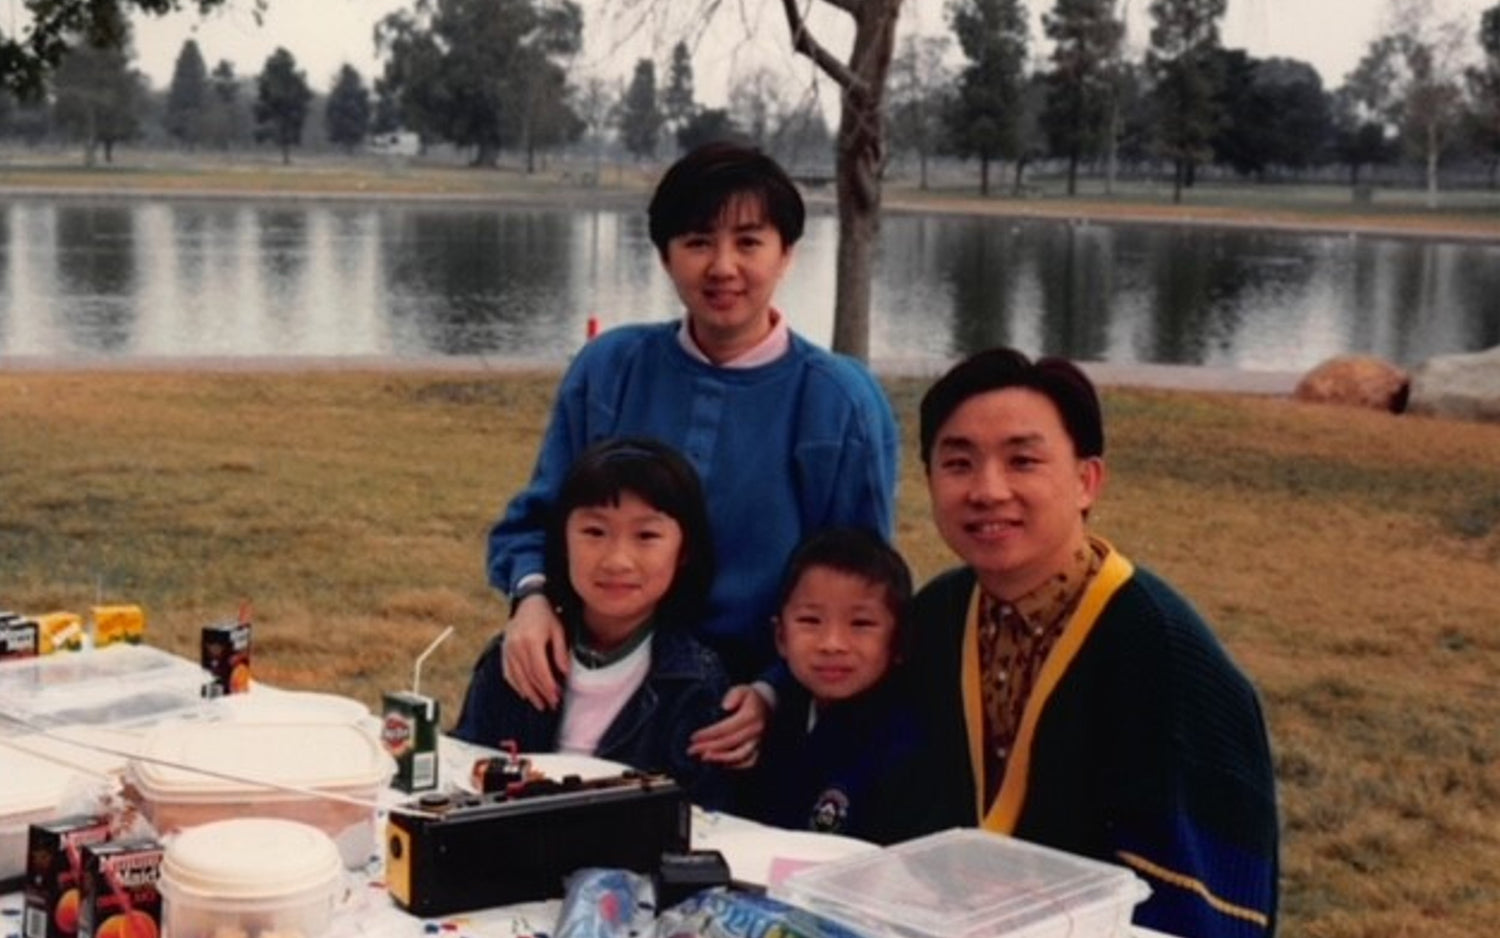 Fong Family back in the 1990s, Retrospective & Feature for Asian American Pacific Islander Heritage Month